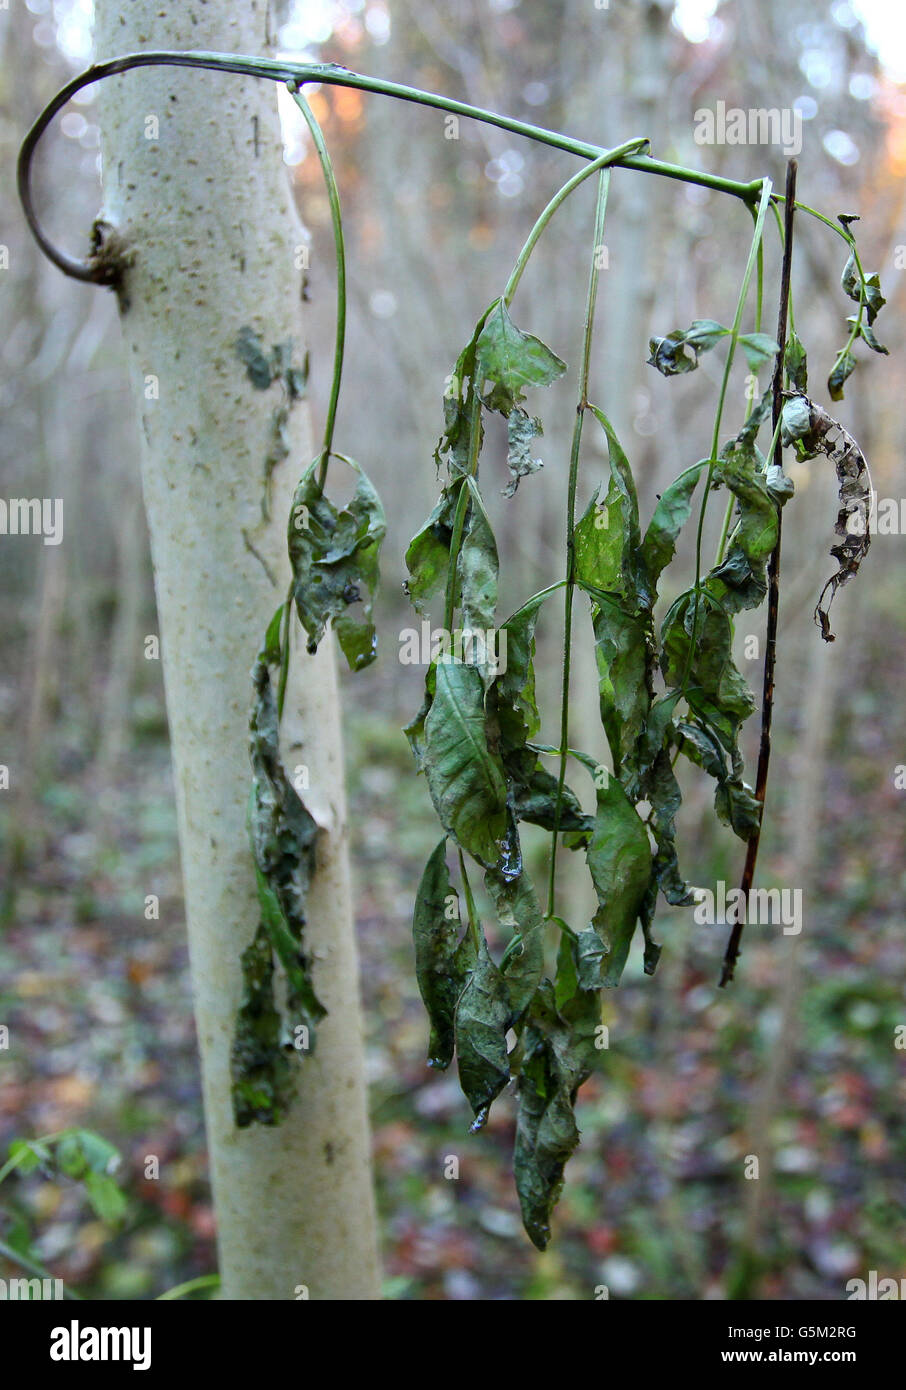 A general view of a young Common Ash Tree with wilting leaves in woodland near Canterbury, Kent, which shows the symptoms of the deadly plant pathogen fungus Chalara Fraxinea Dieback. Stock Photo